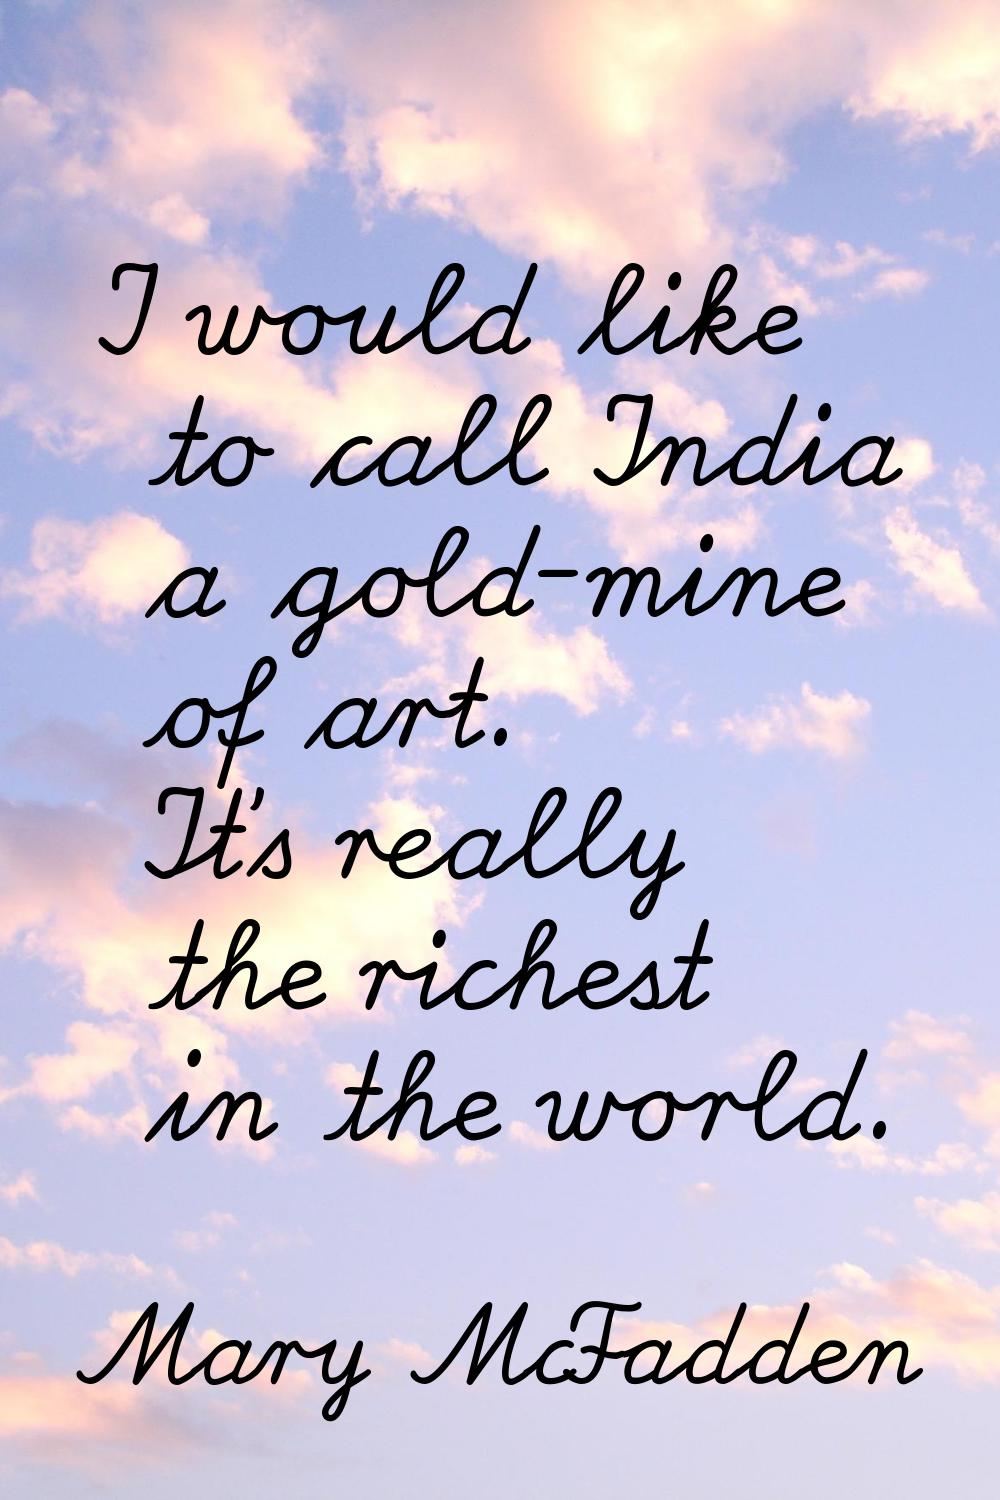 I would like to call India a gold-mine of art. It's really the richest in the world.